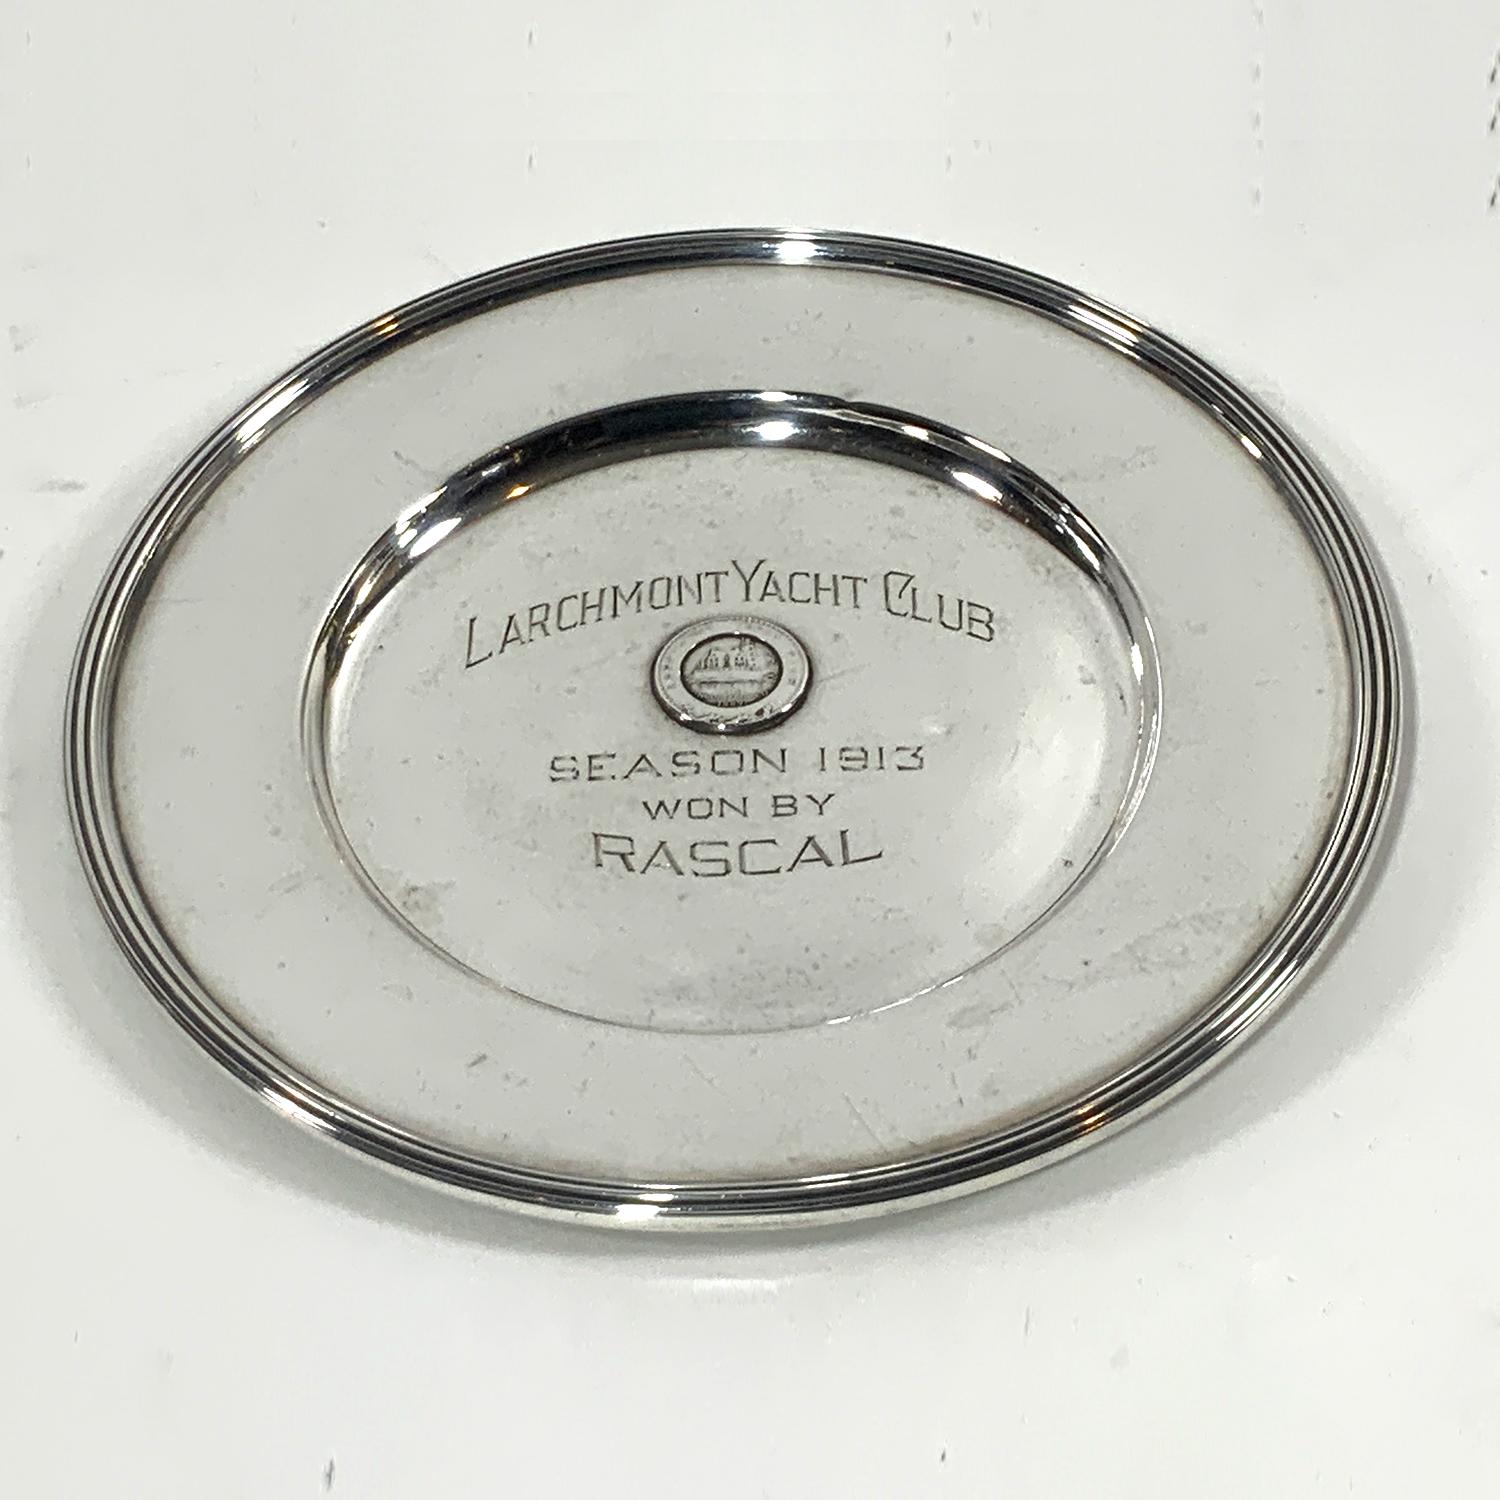 1913 Sterling Larchmont Yacht Club Trophy In Good Condition For Sale In Norwell, MA